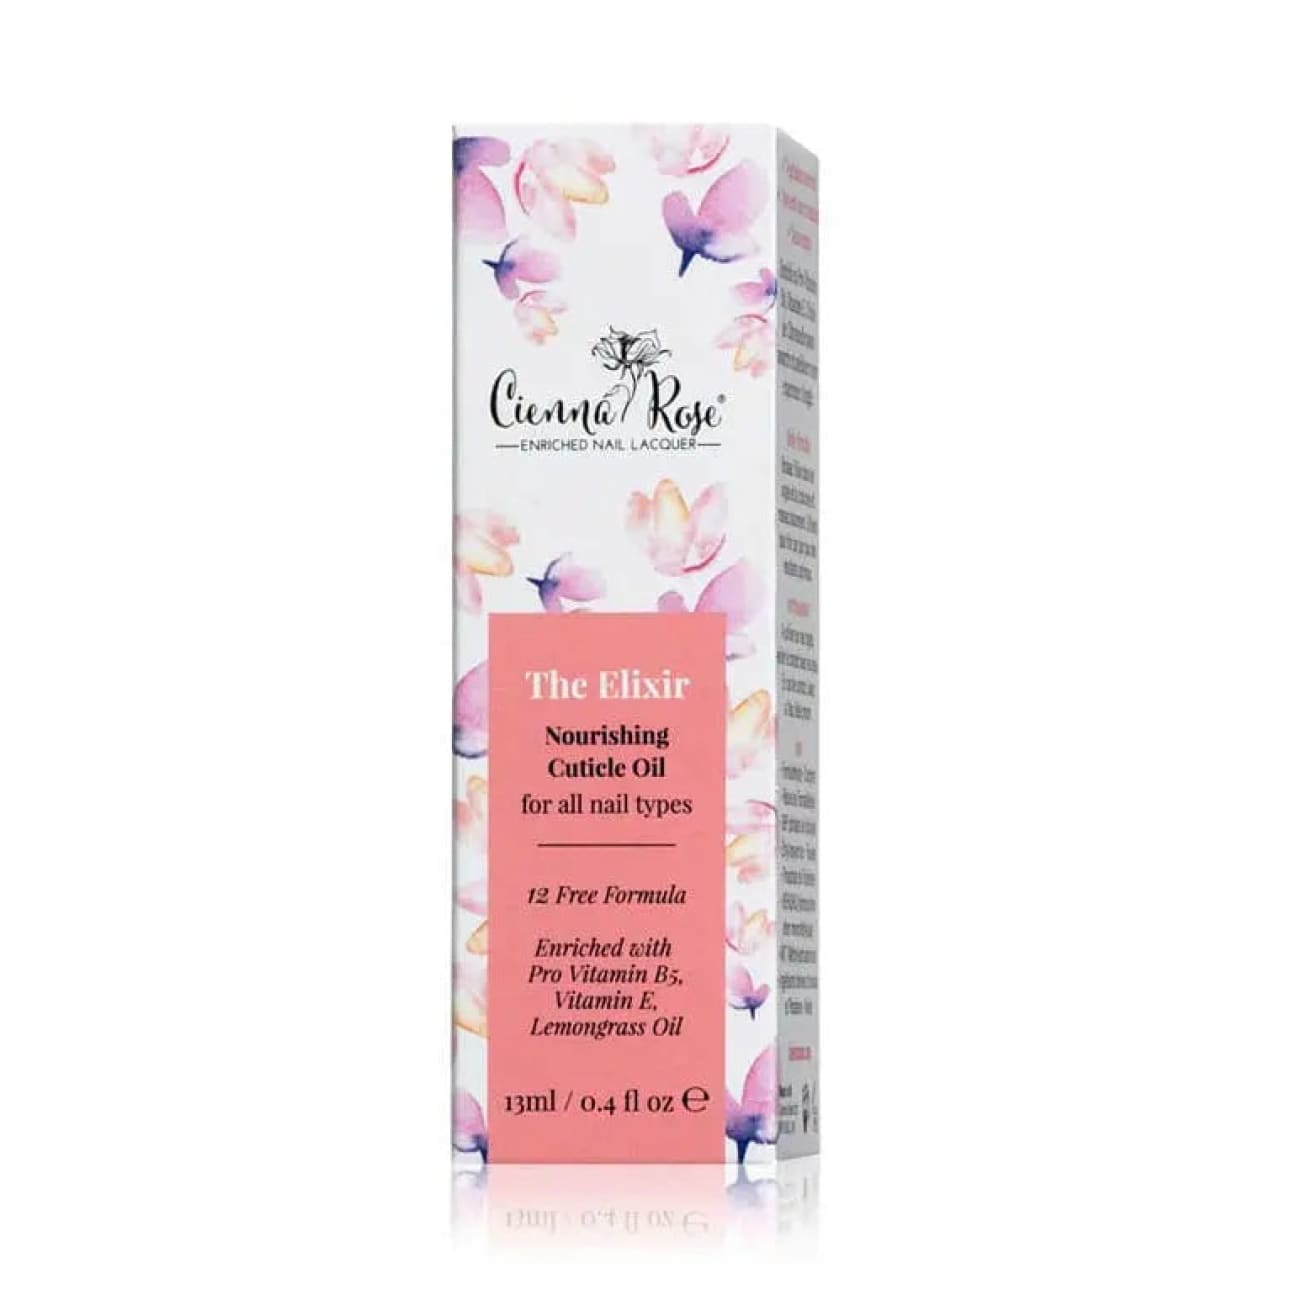 The Elixir - Nourishing Cuticle Oil for all nail types Rock Chocs 